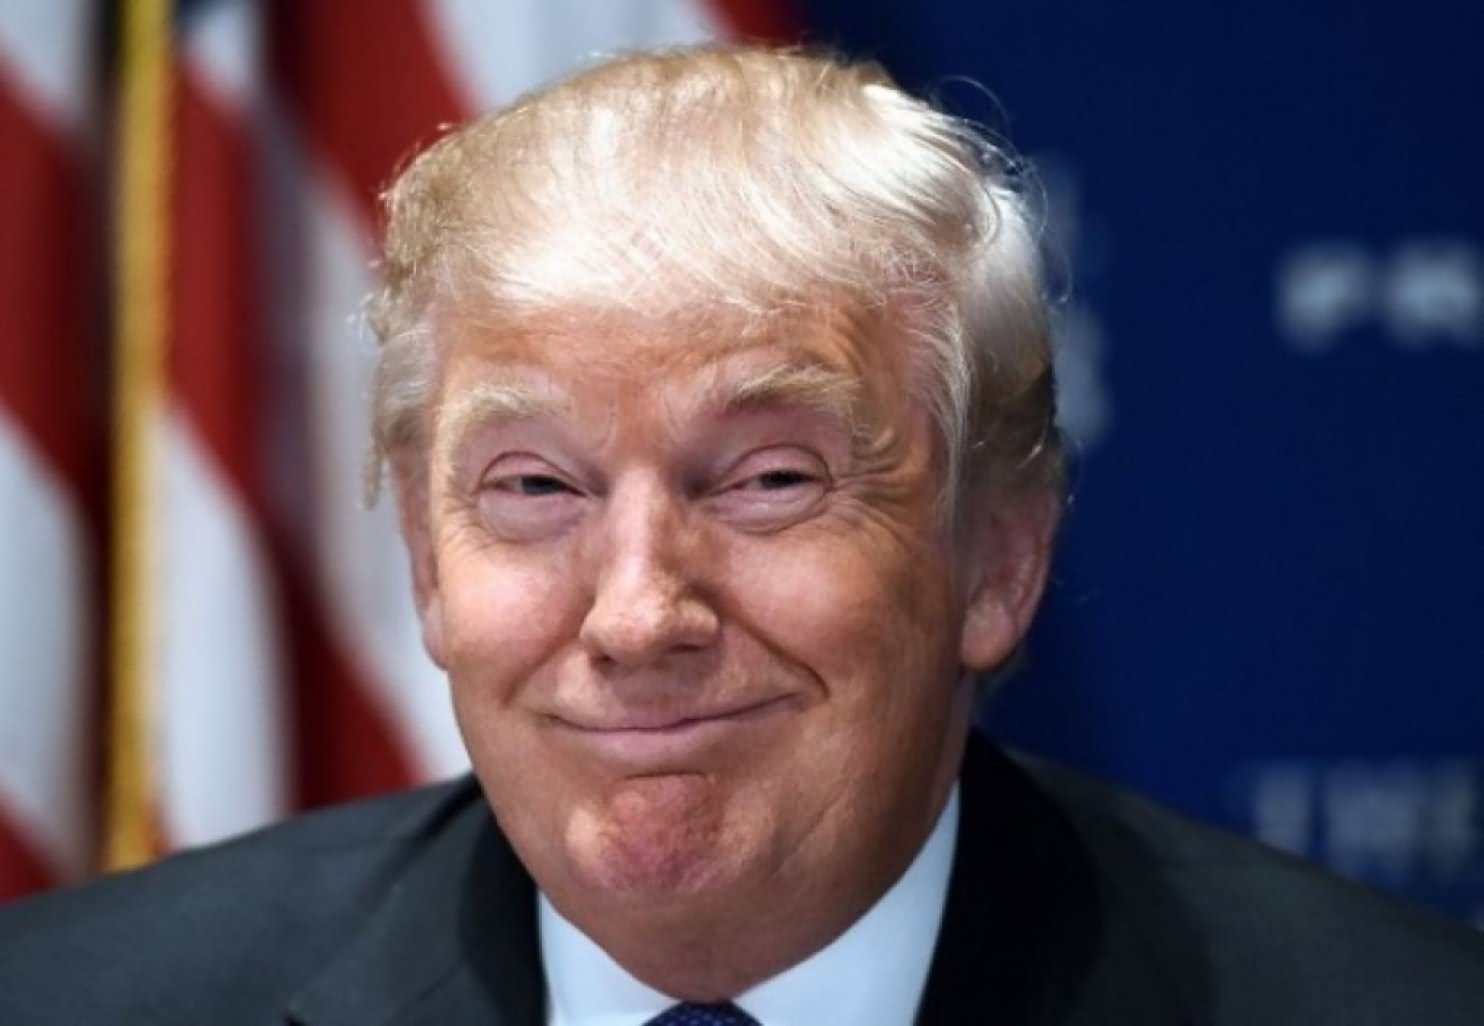 Very-Funny-Smiling-Donald-Trump-Picture.